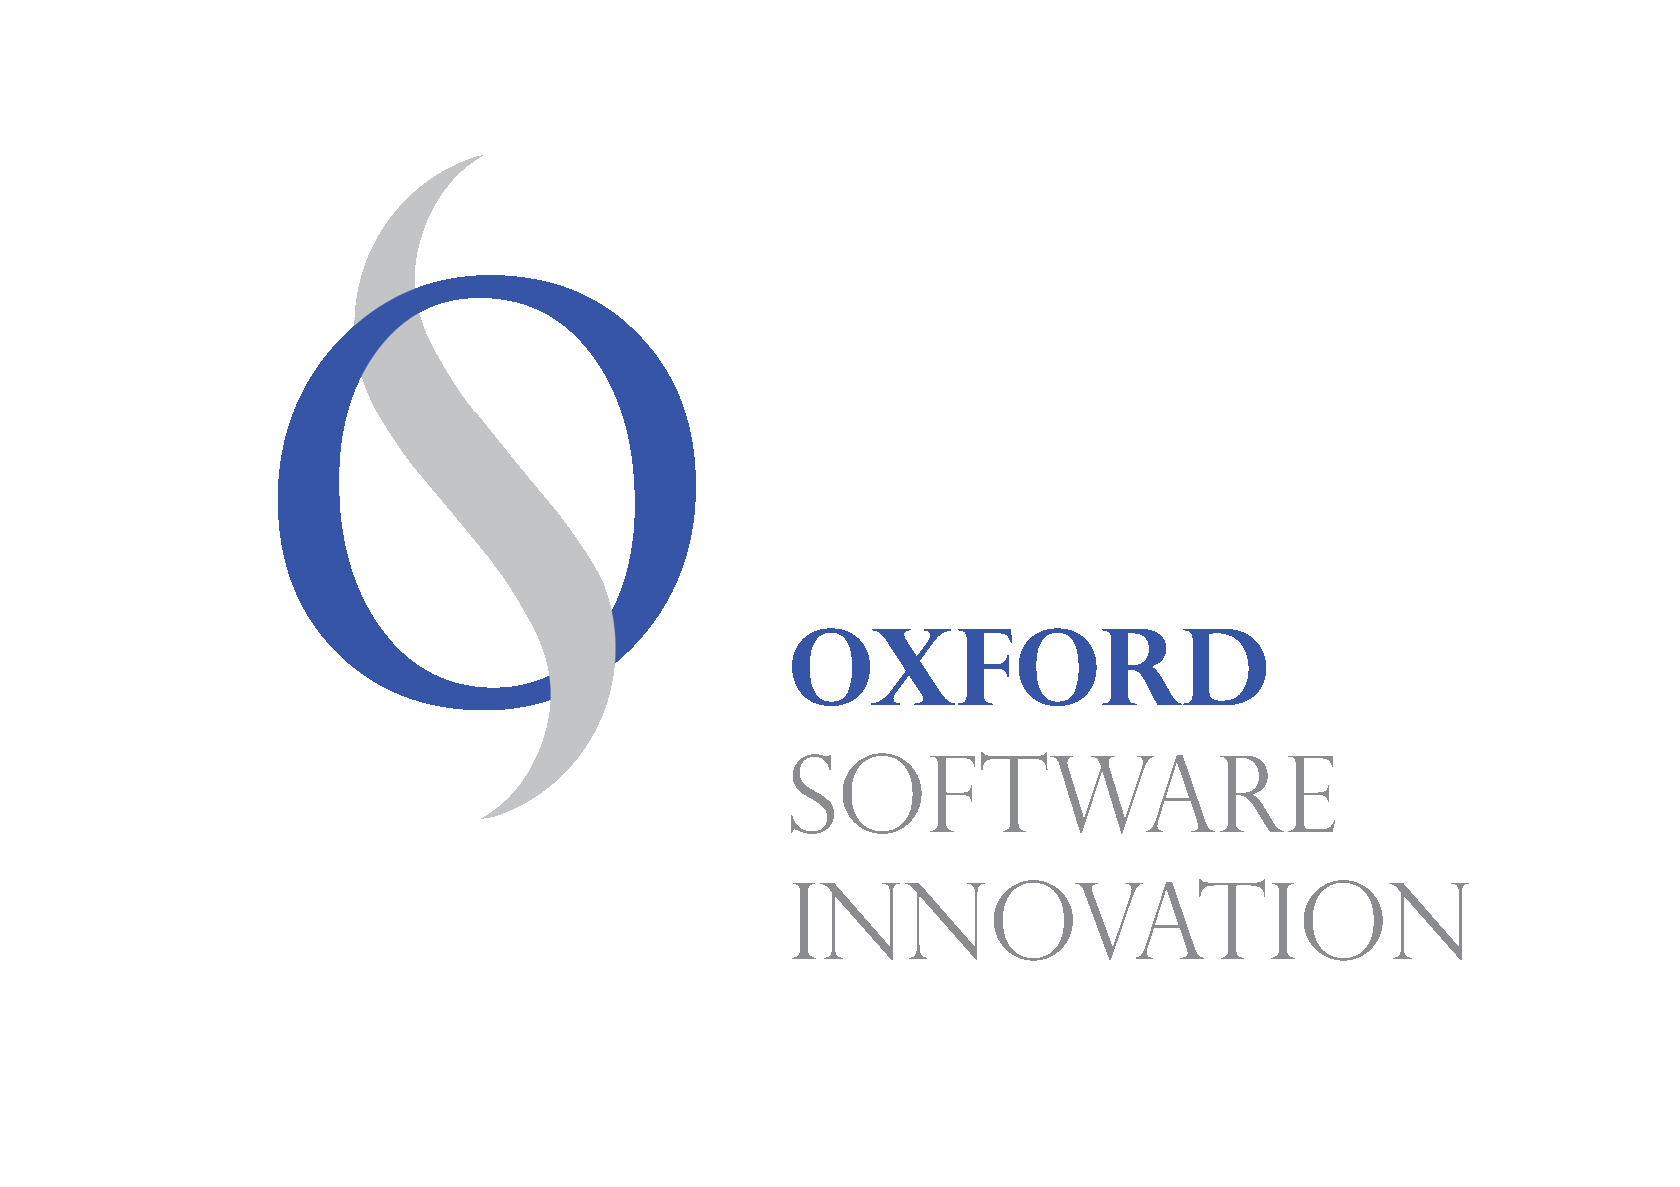 Oxford Software Innovation